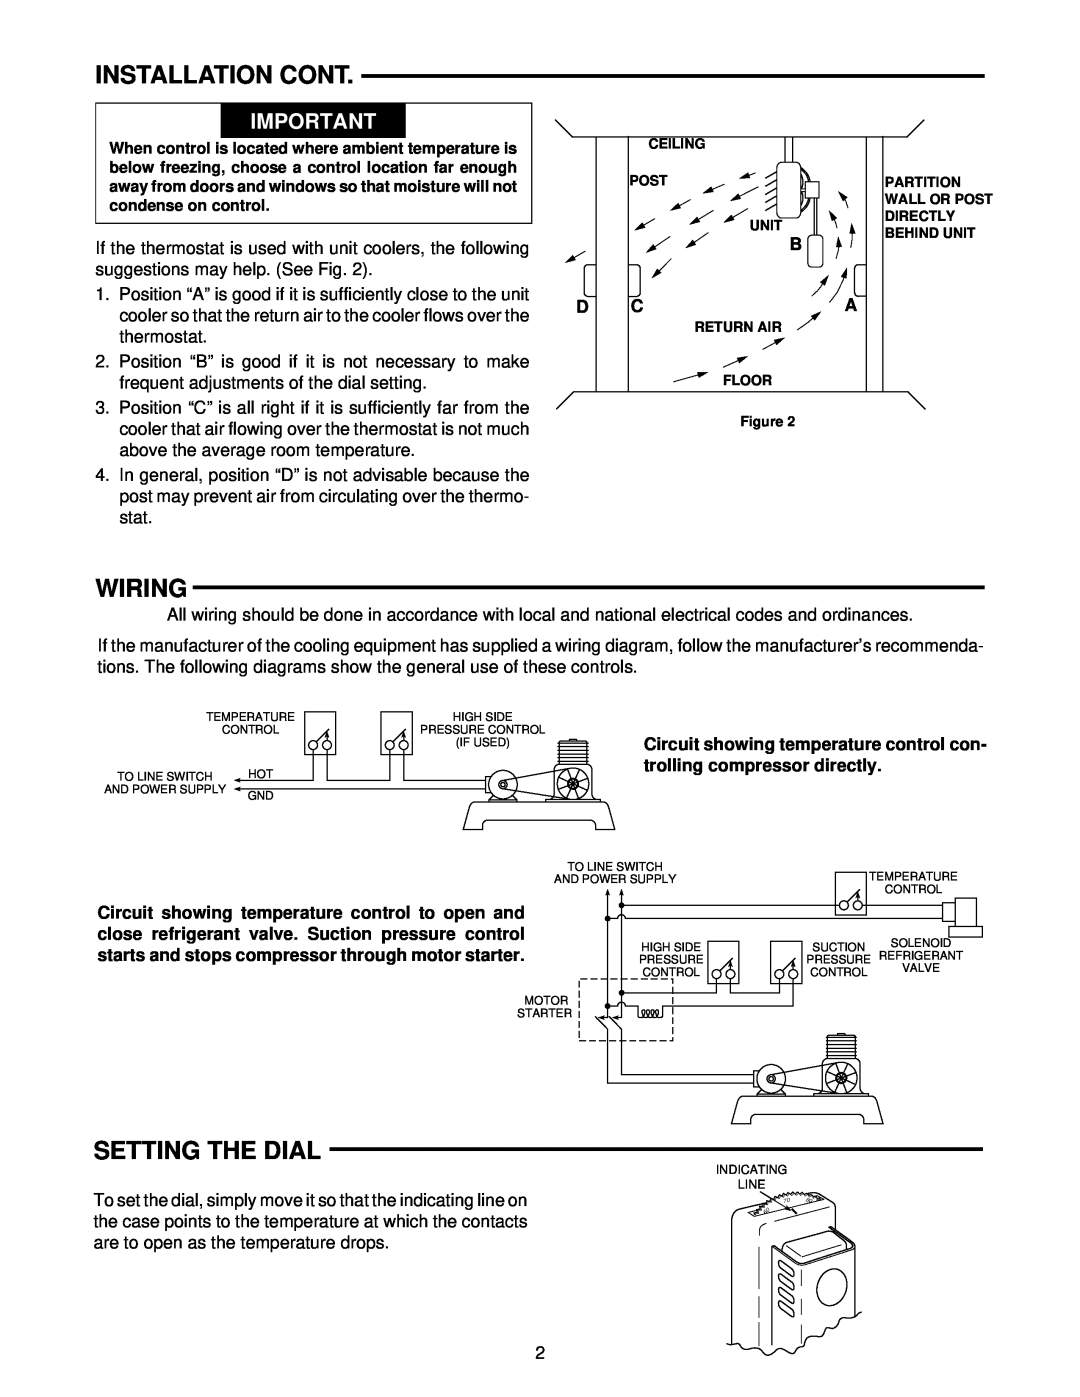 White Rodgers 151 installation instructions Installation Cont, Wiring, Setting The Dial 